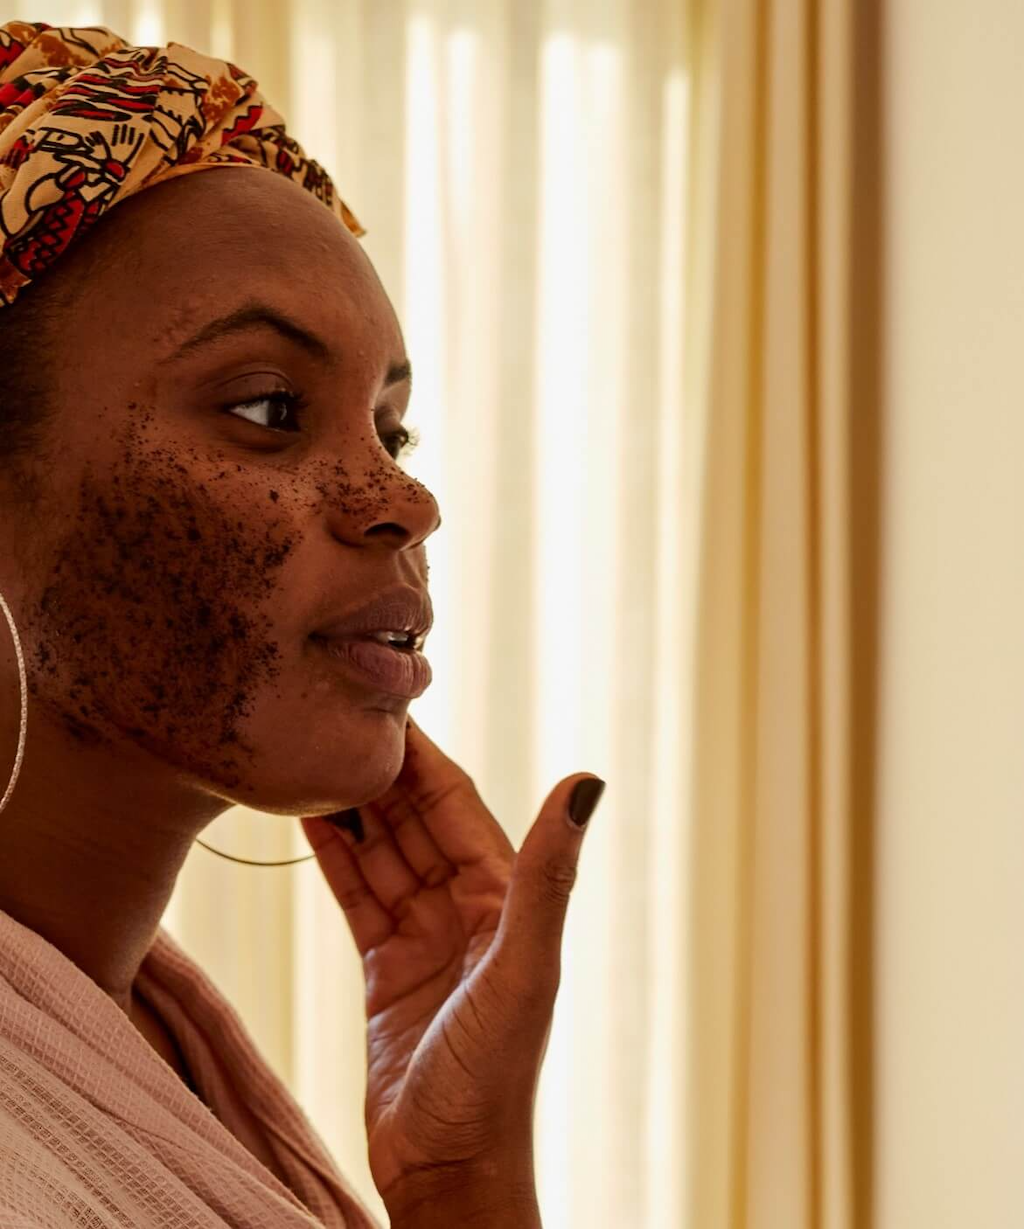 black woman wearing a red and yellow head scarf can be seen applying the coffee exfoliator to her face